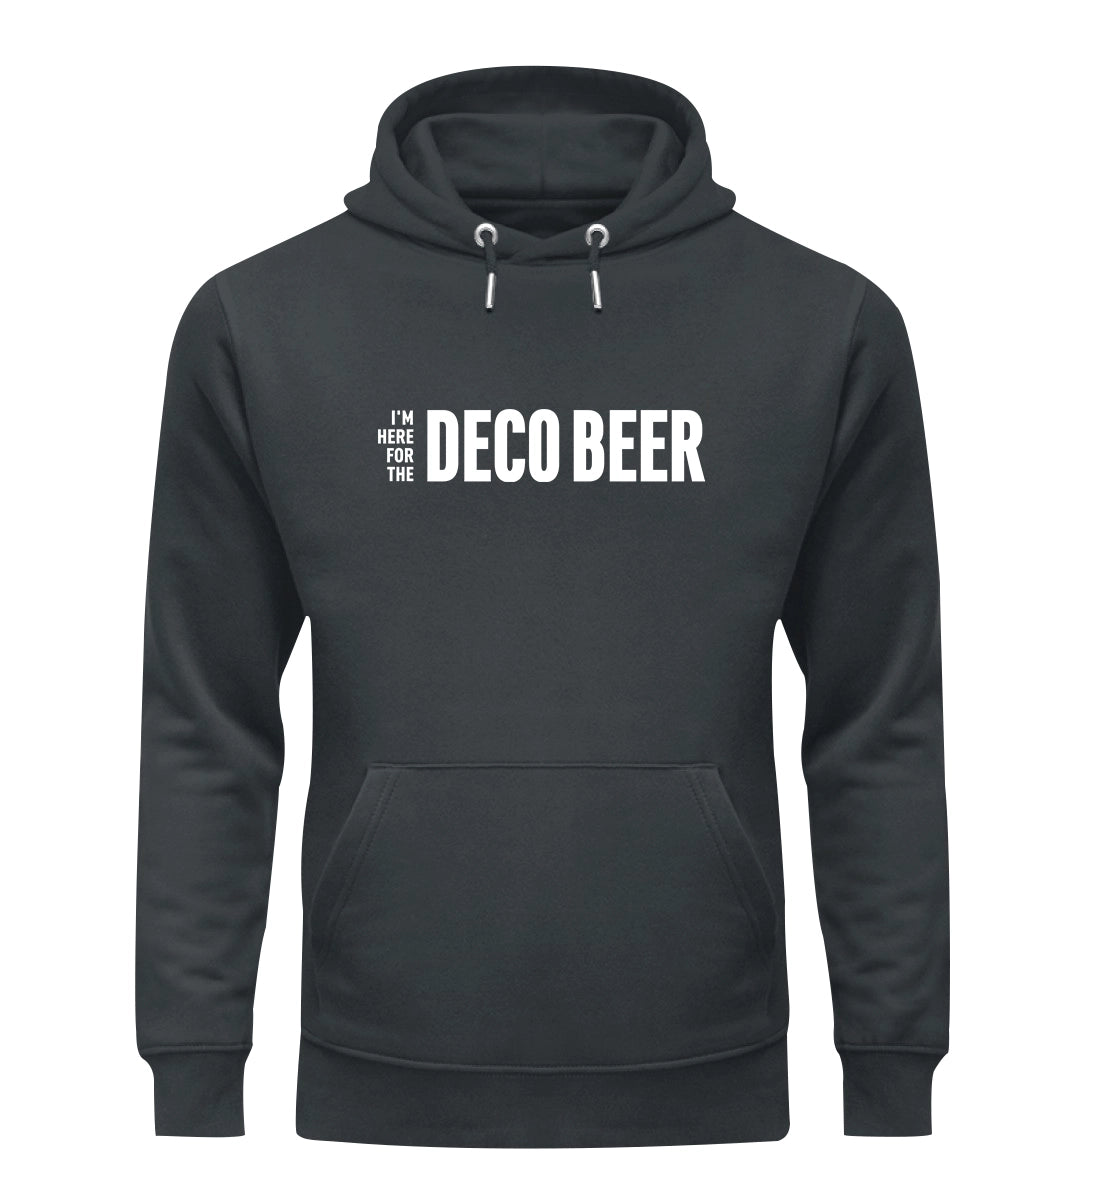 I'm here for the Deco Beer - Bio Hoodie